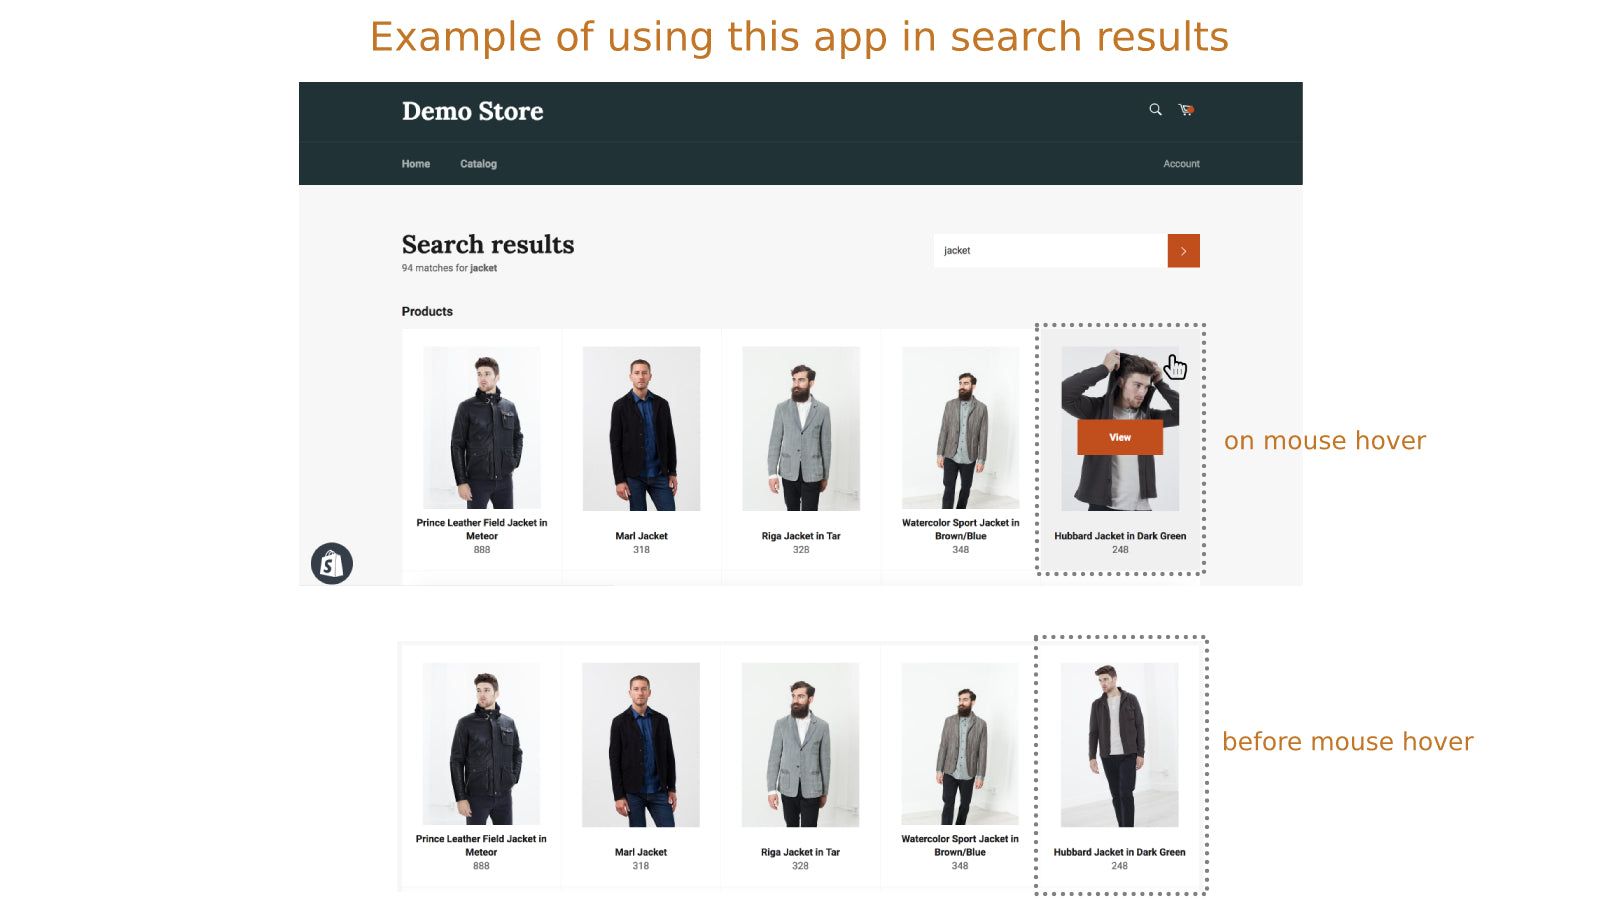 Example of using app in search results